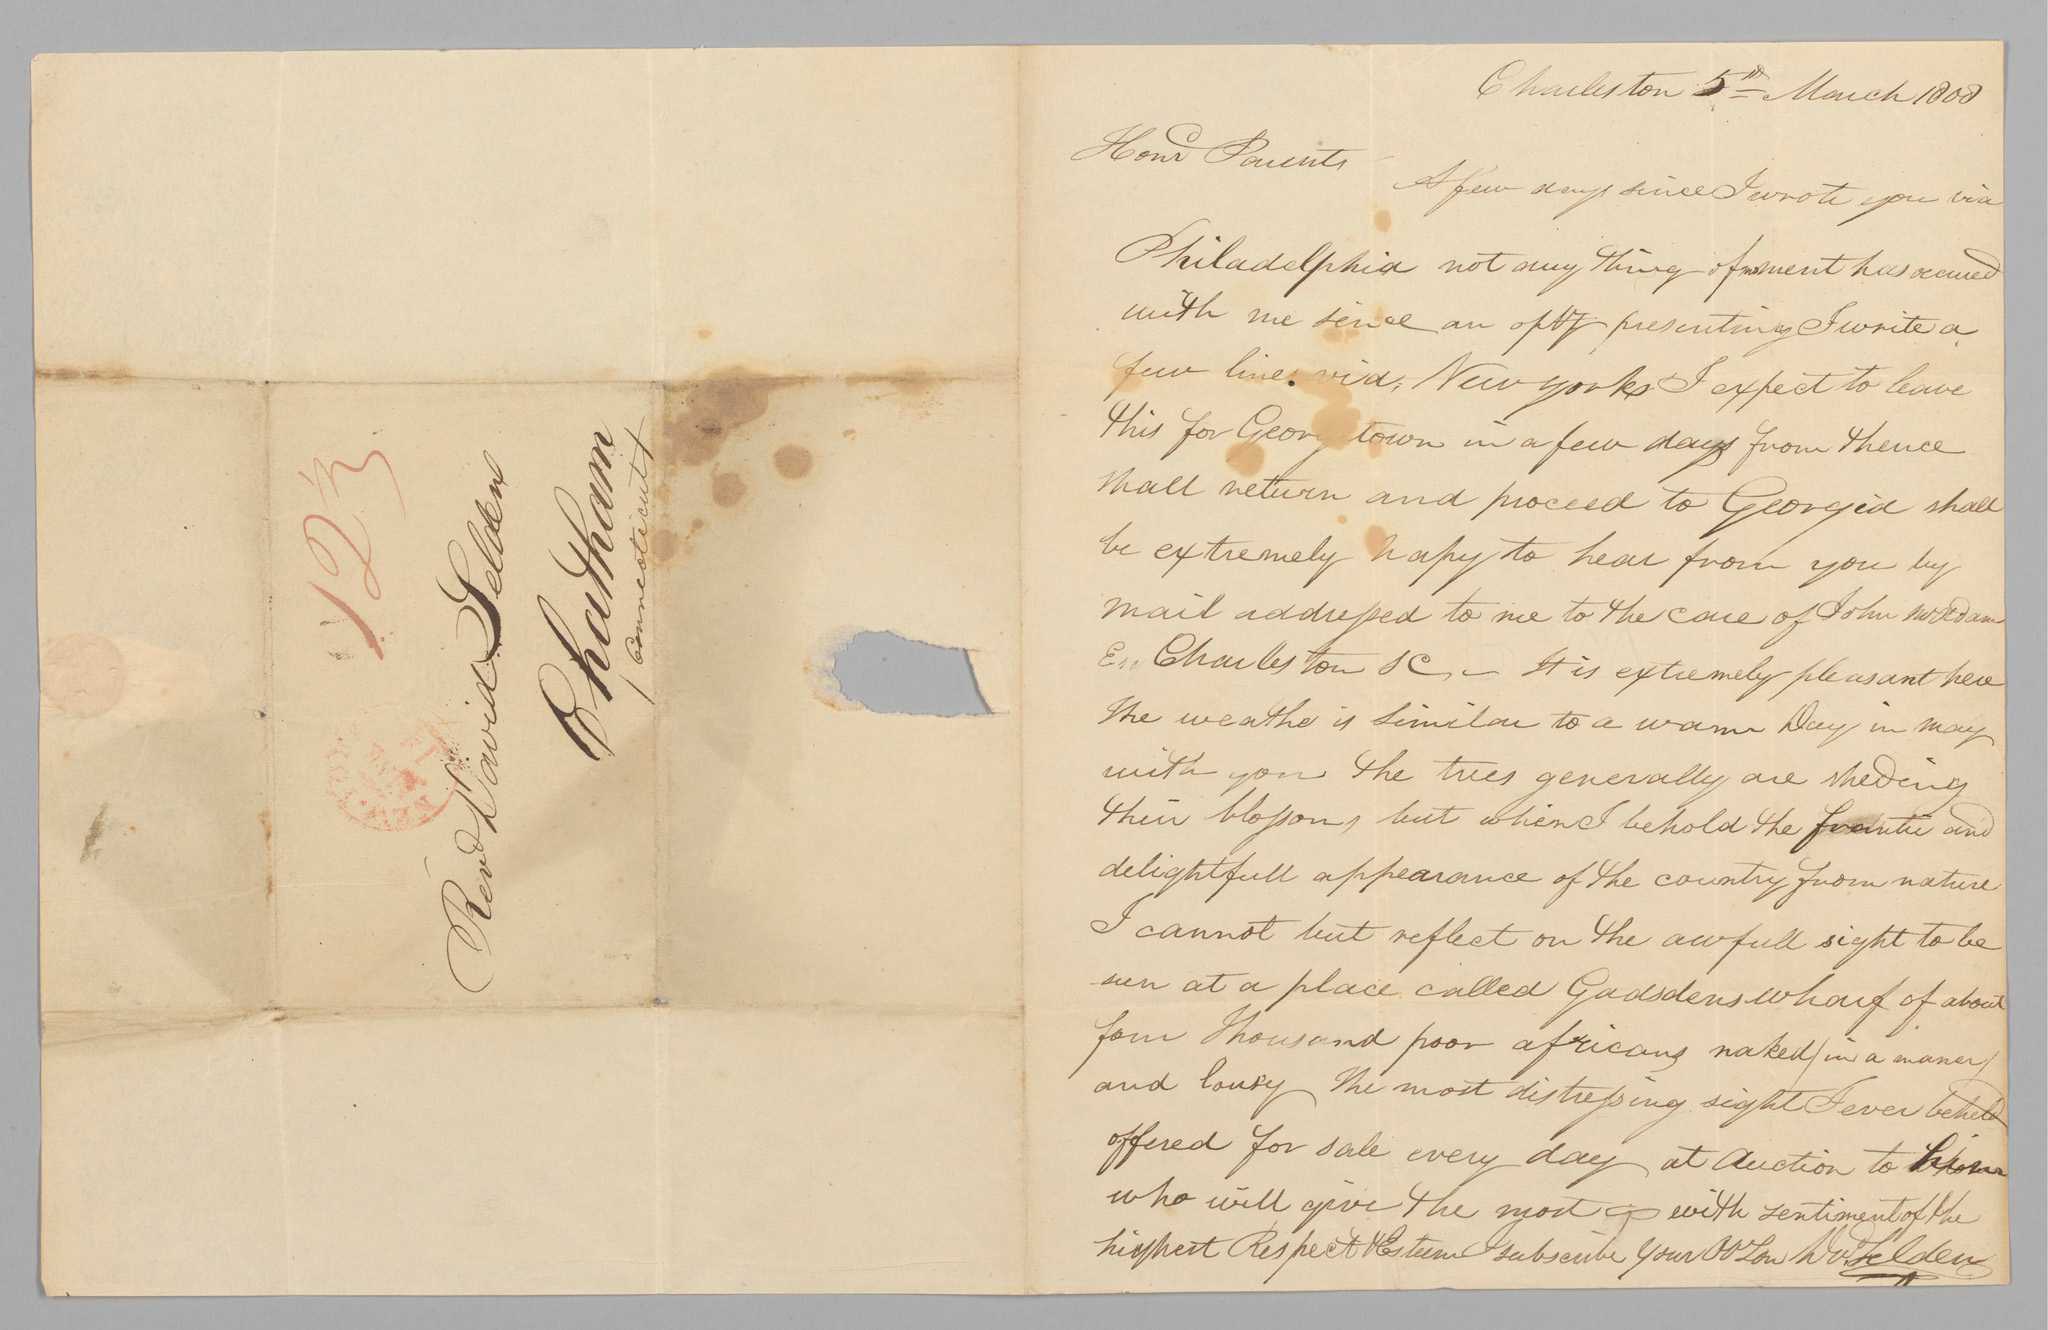 This letter was written from Charleston, South Carolina, on March 5, 1808, by David Selden to his parents in Chatham, Connecticut.